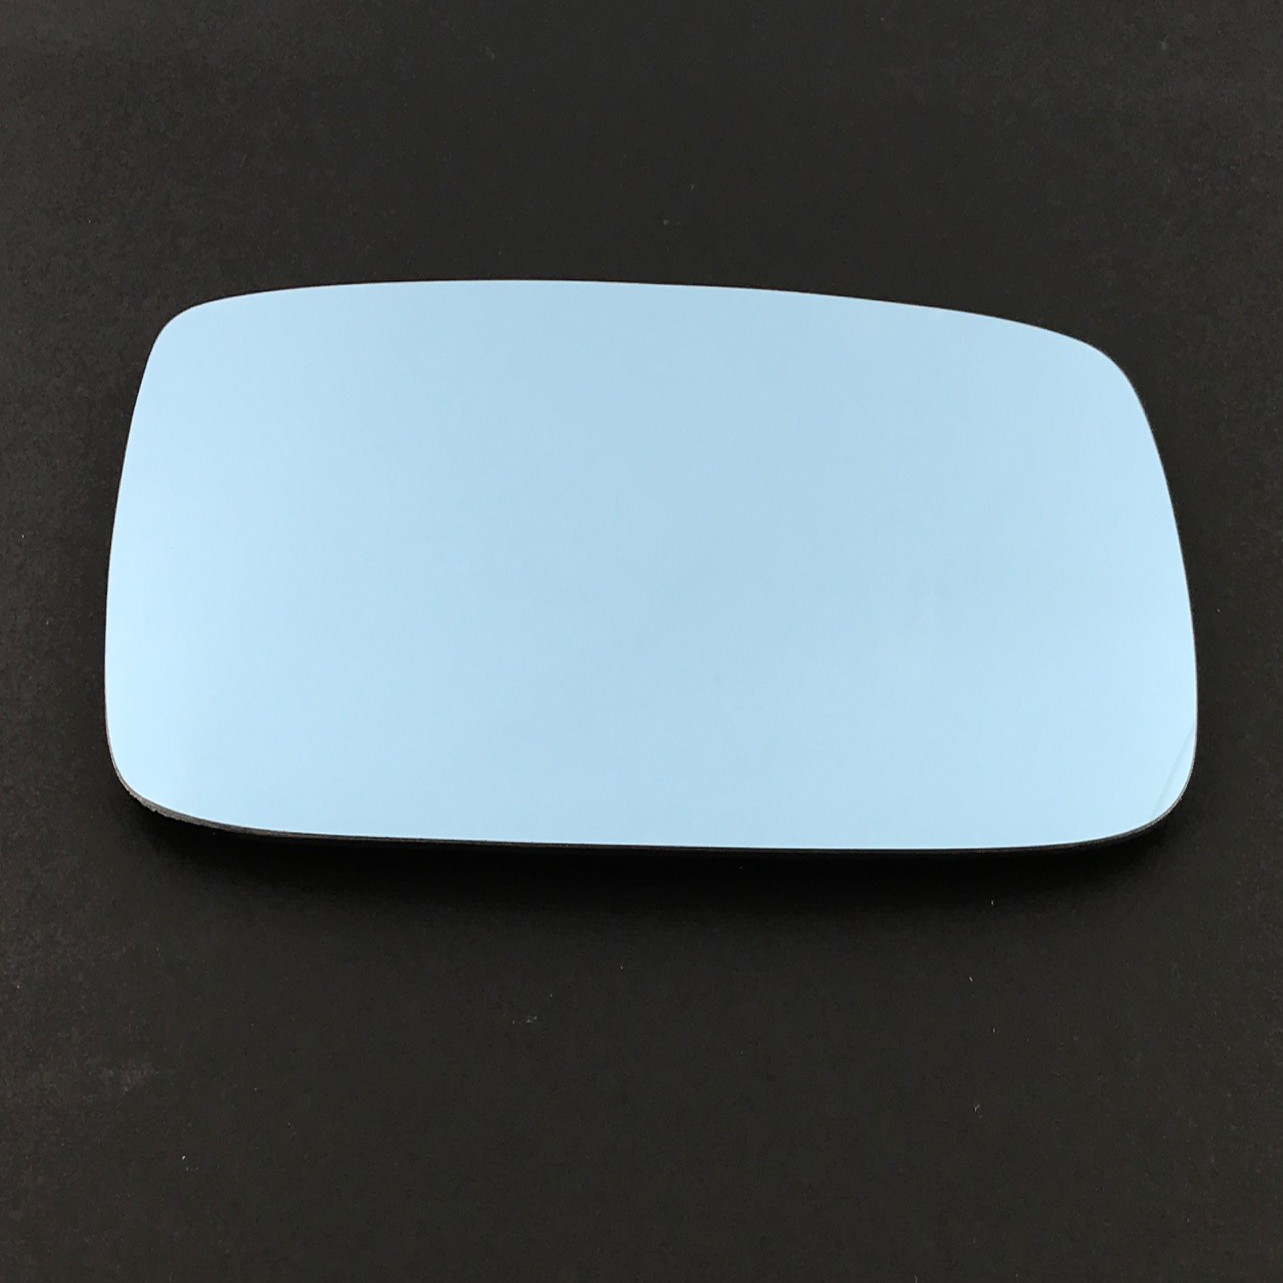 Volvo 940 Wing Mirror Glass LEFT HAND ( UK Passenger Side ) 1990 to 1997 – Convex Wing Mirror ( Blue Tinted )